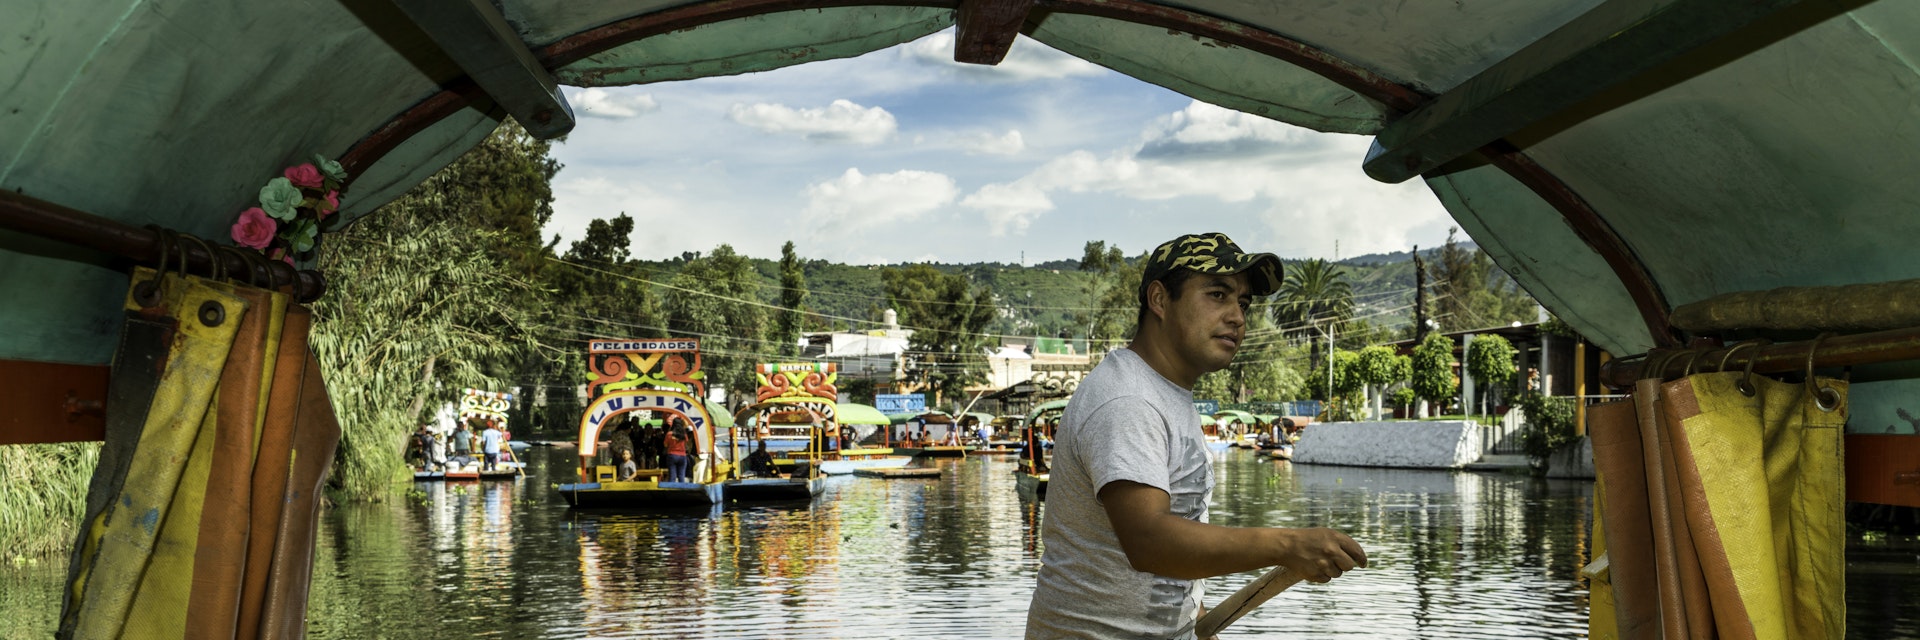 Trajinera or punt on the canals and floating gardens of Xochimilco Mexico City